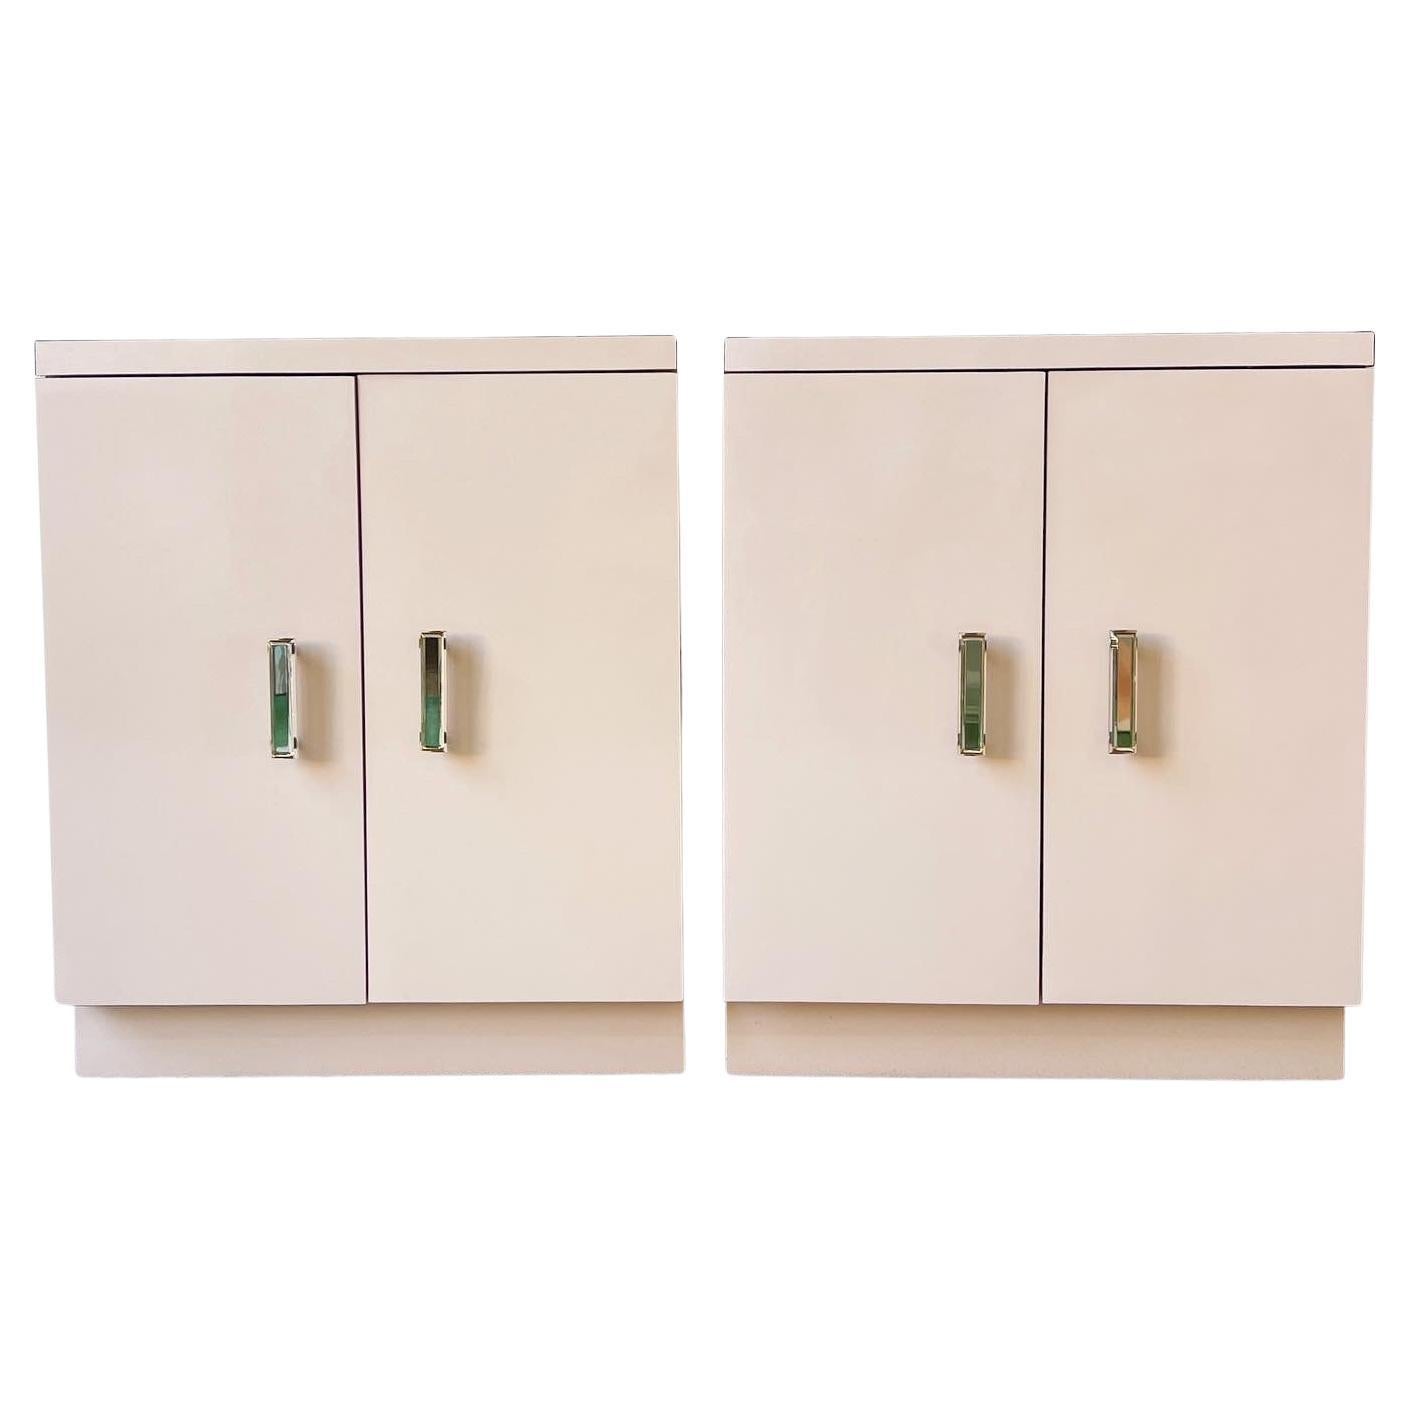 Postmodern Peach Lacquer Laminate Cabinet Nightstands with Gold & Lucite Handles